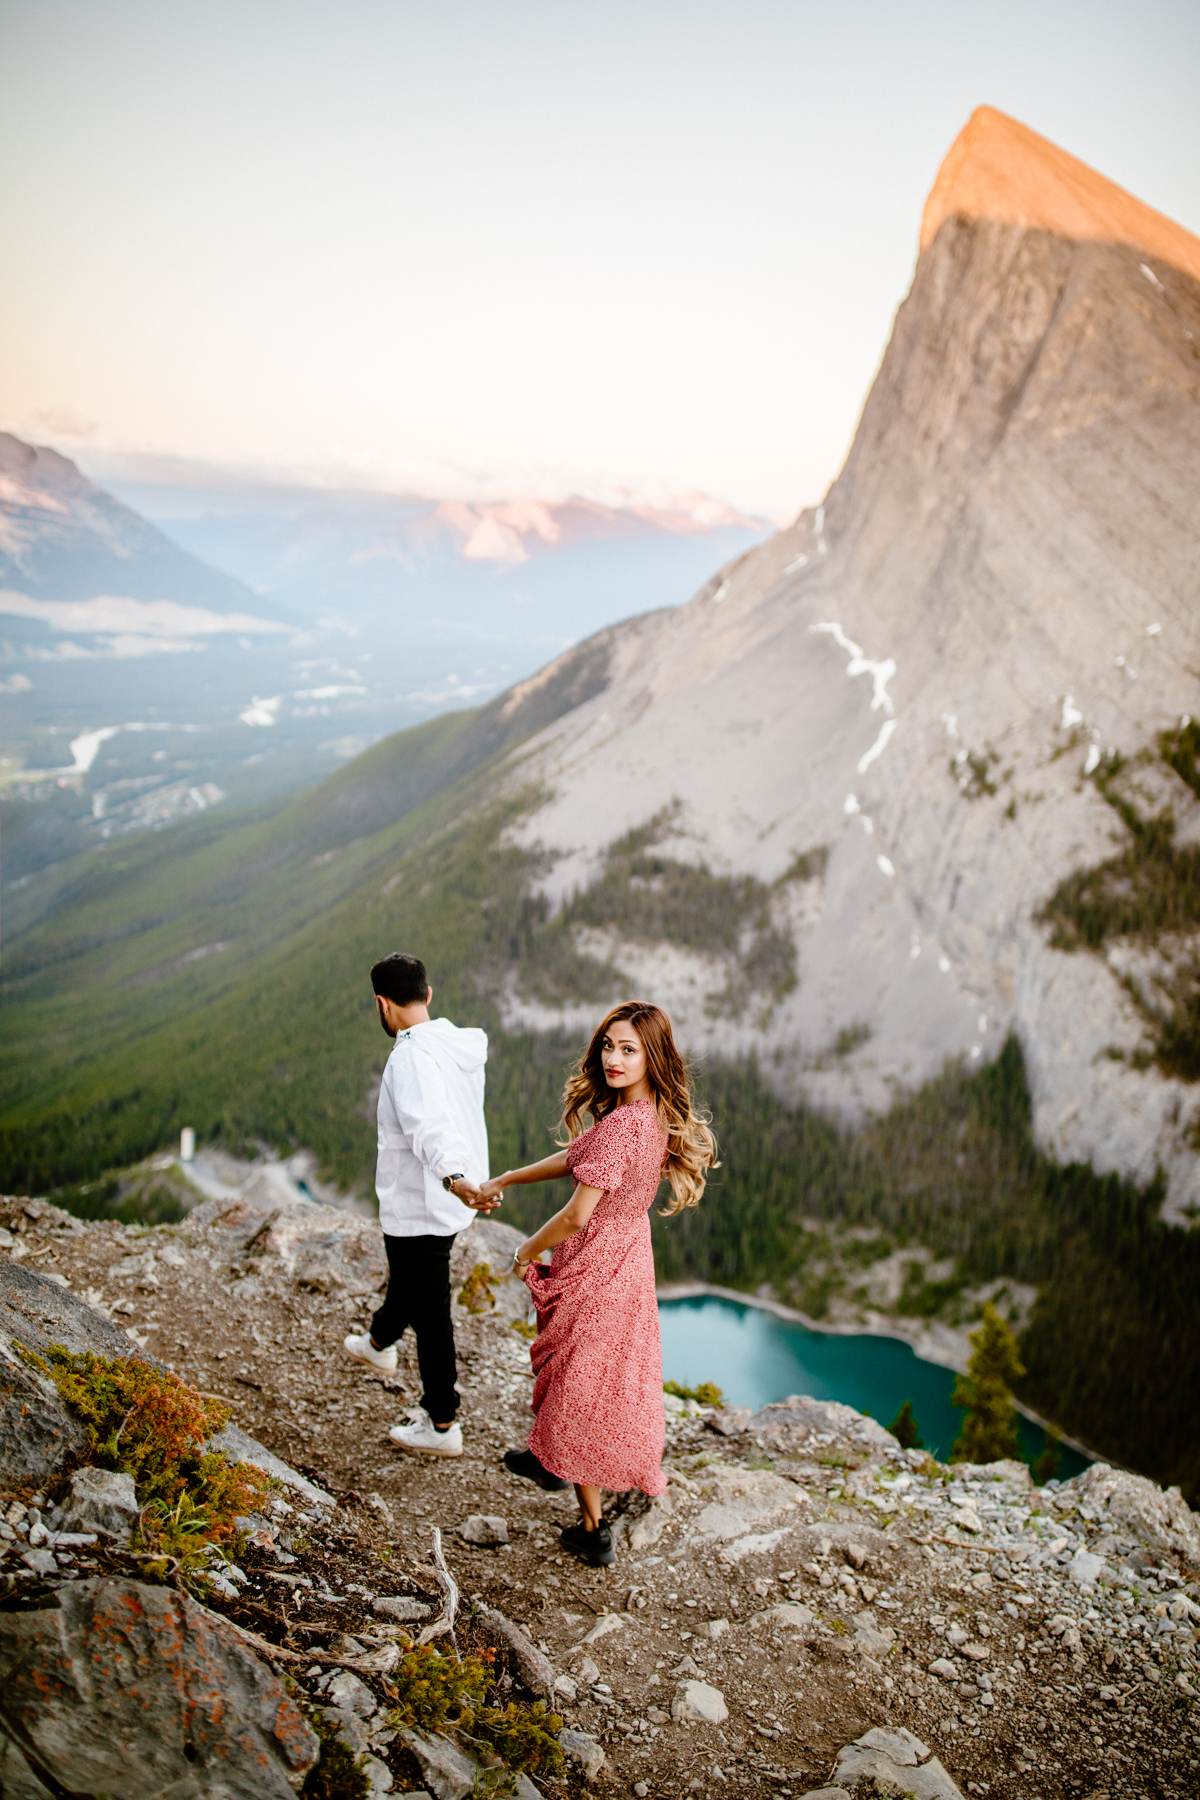 Surprise Proposal Photographers in Banff - Photo 29